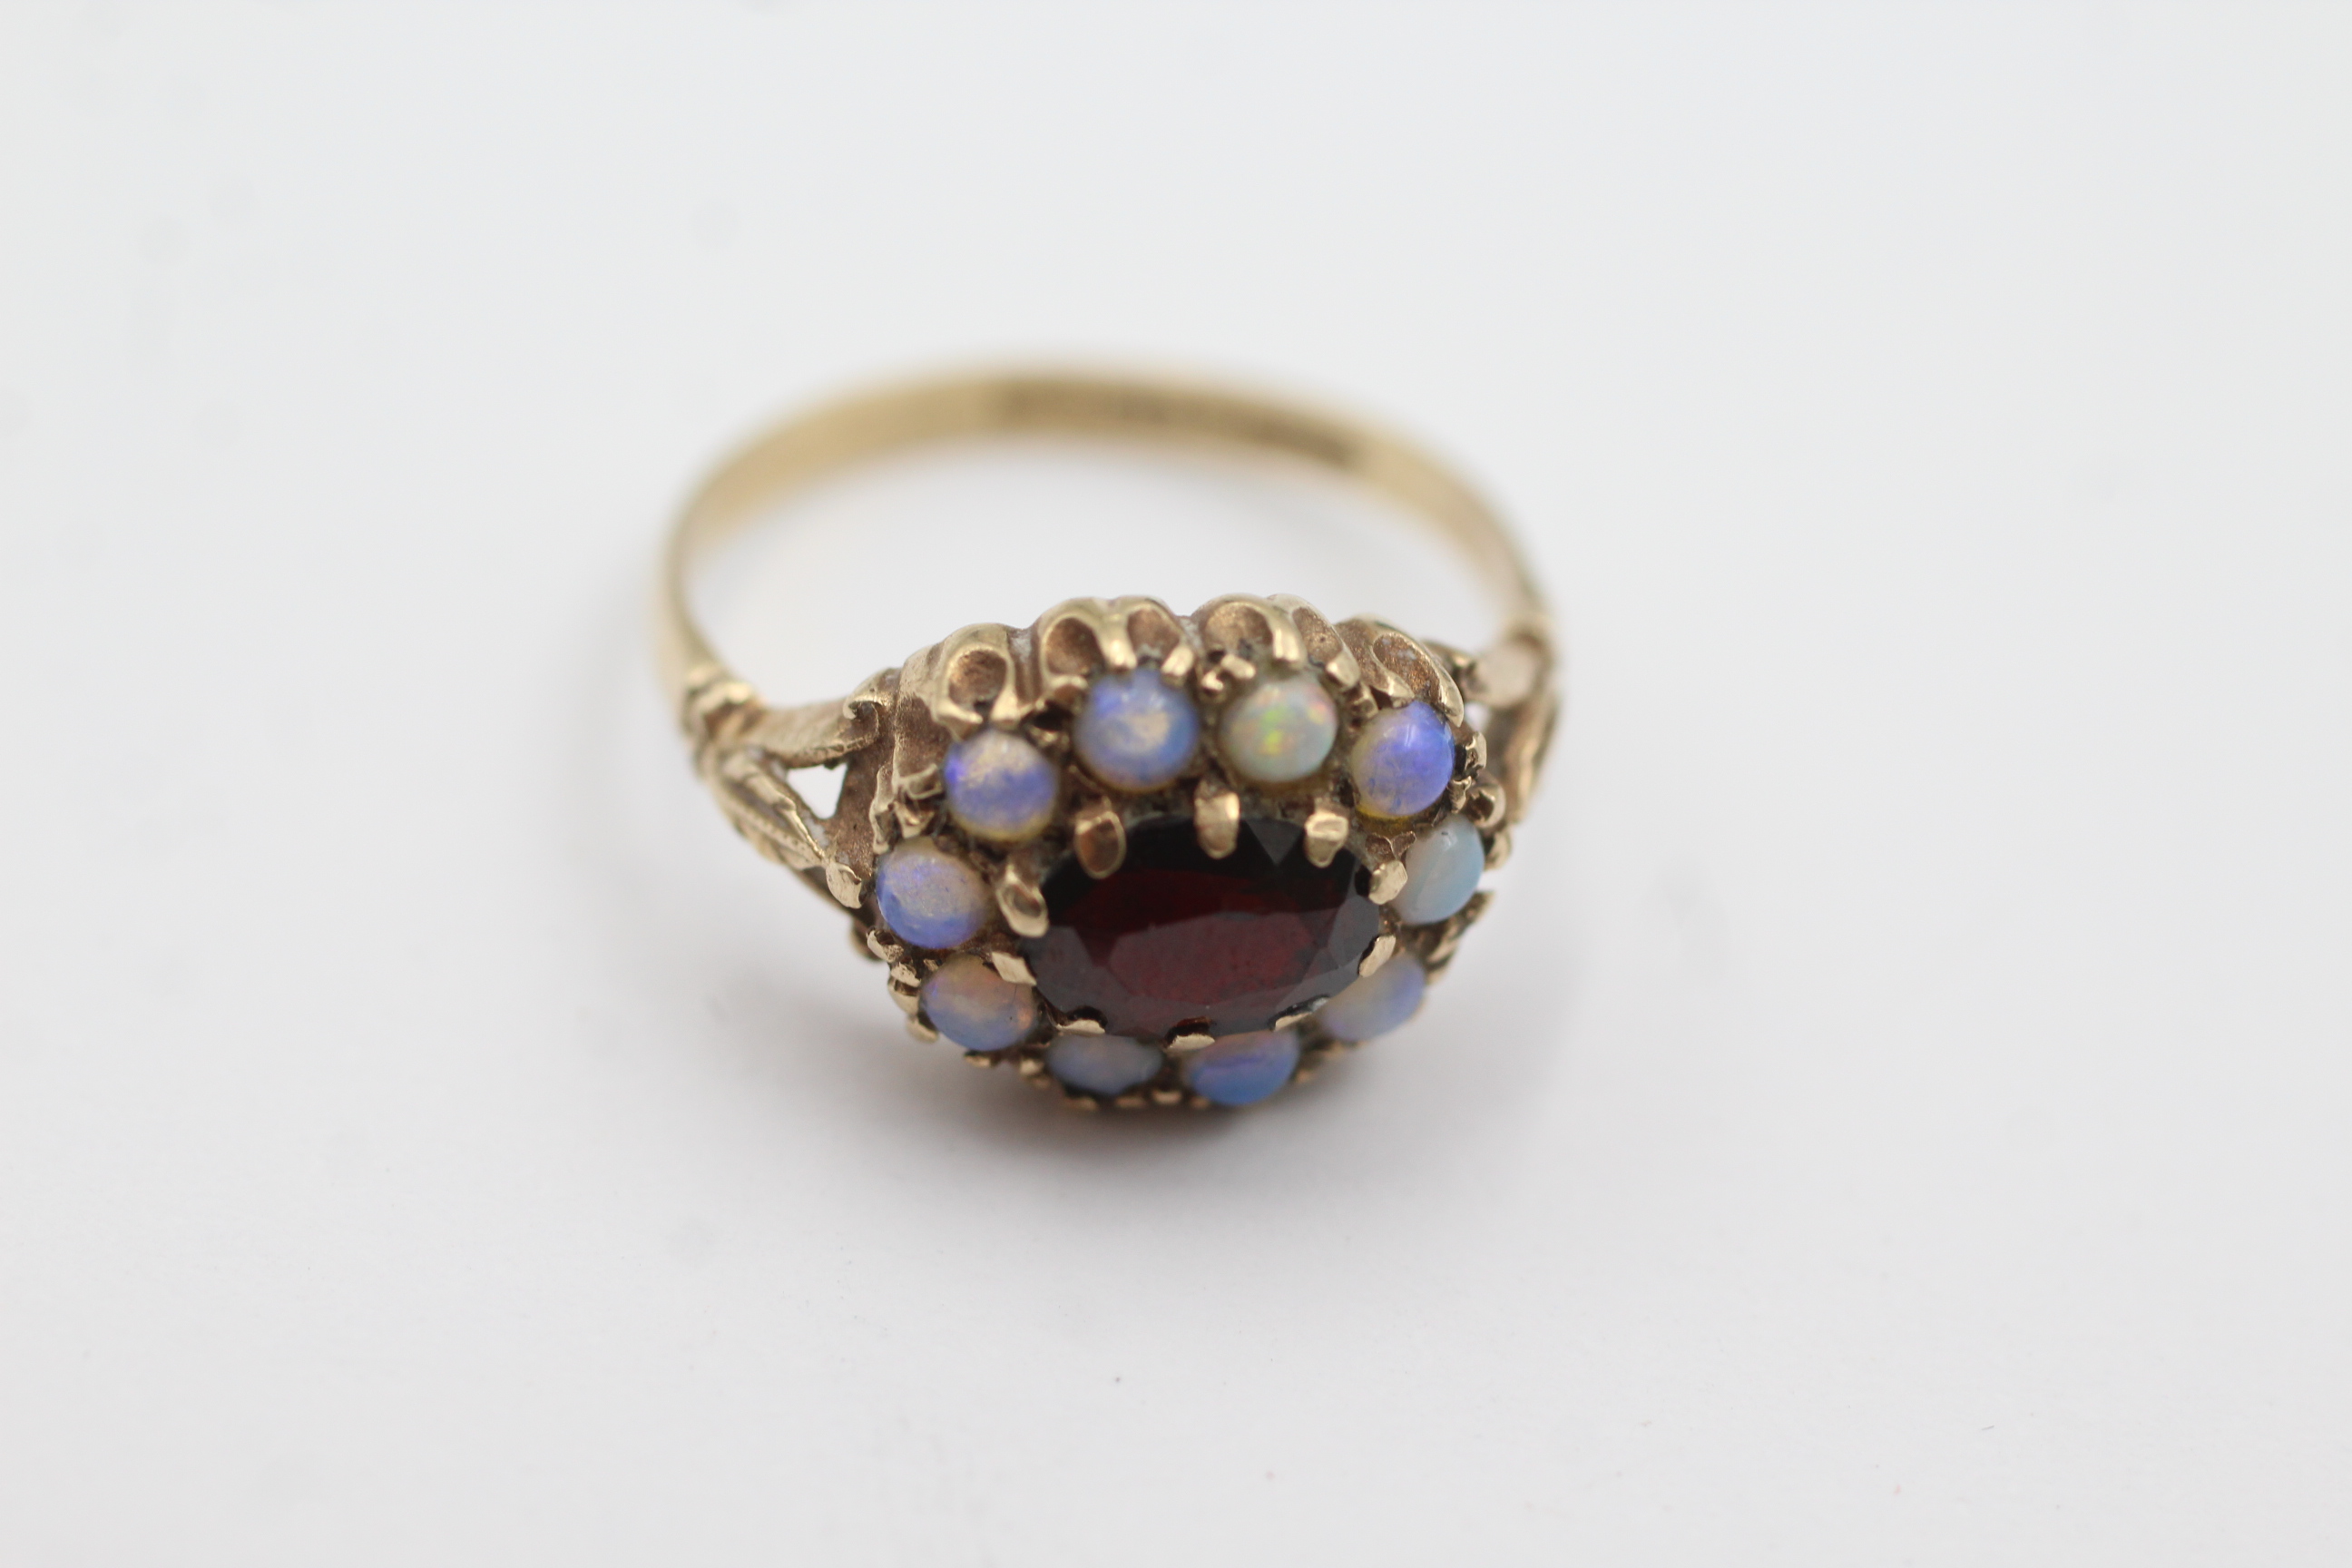 9ct gold opal and garnet dress ring weighs 2.5 grams. Fully hallmarked for 9ct gold. Uk size. N